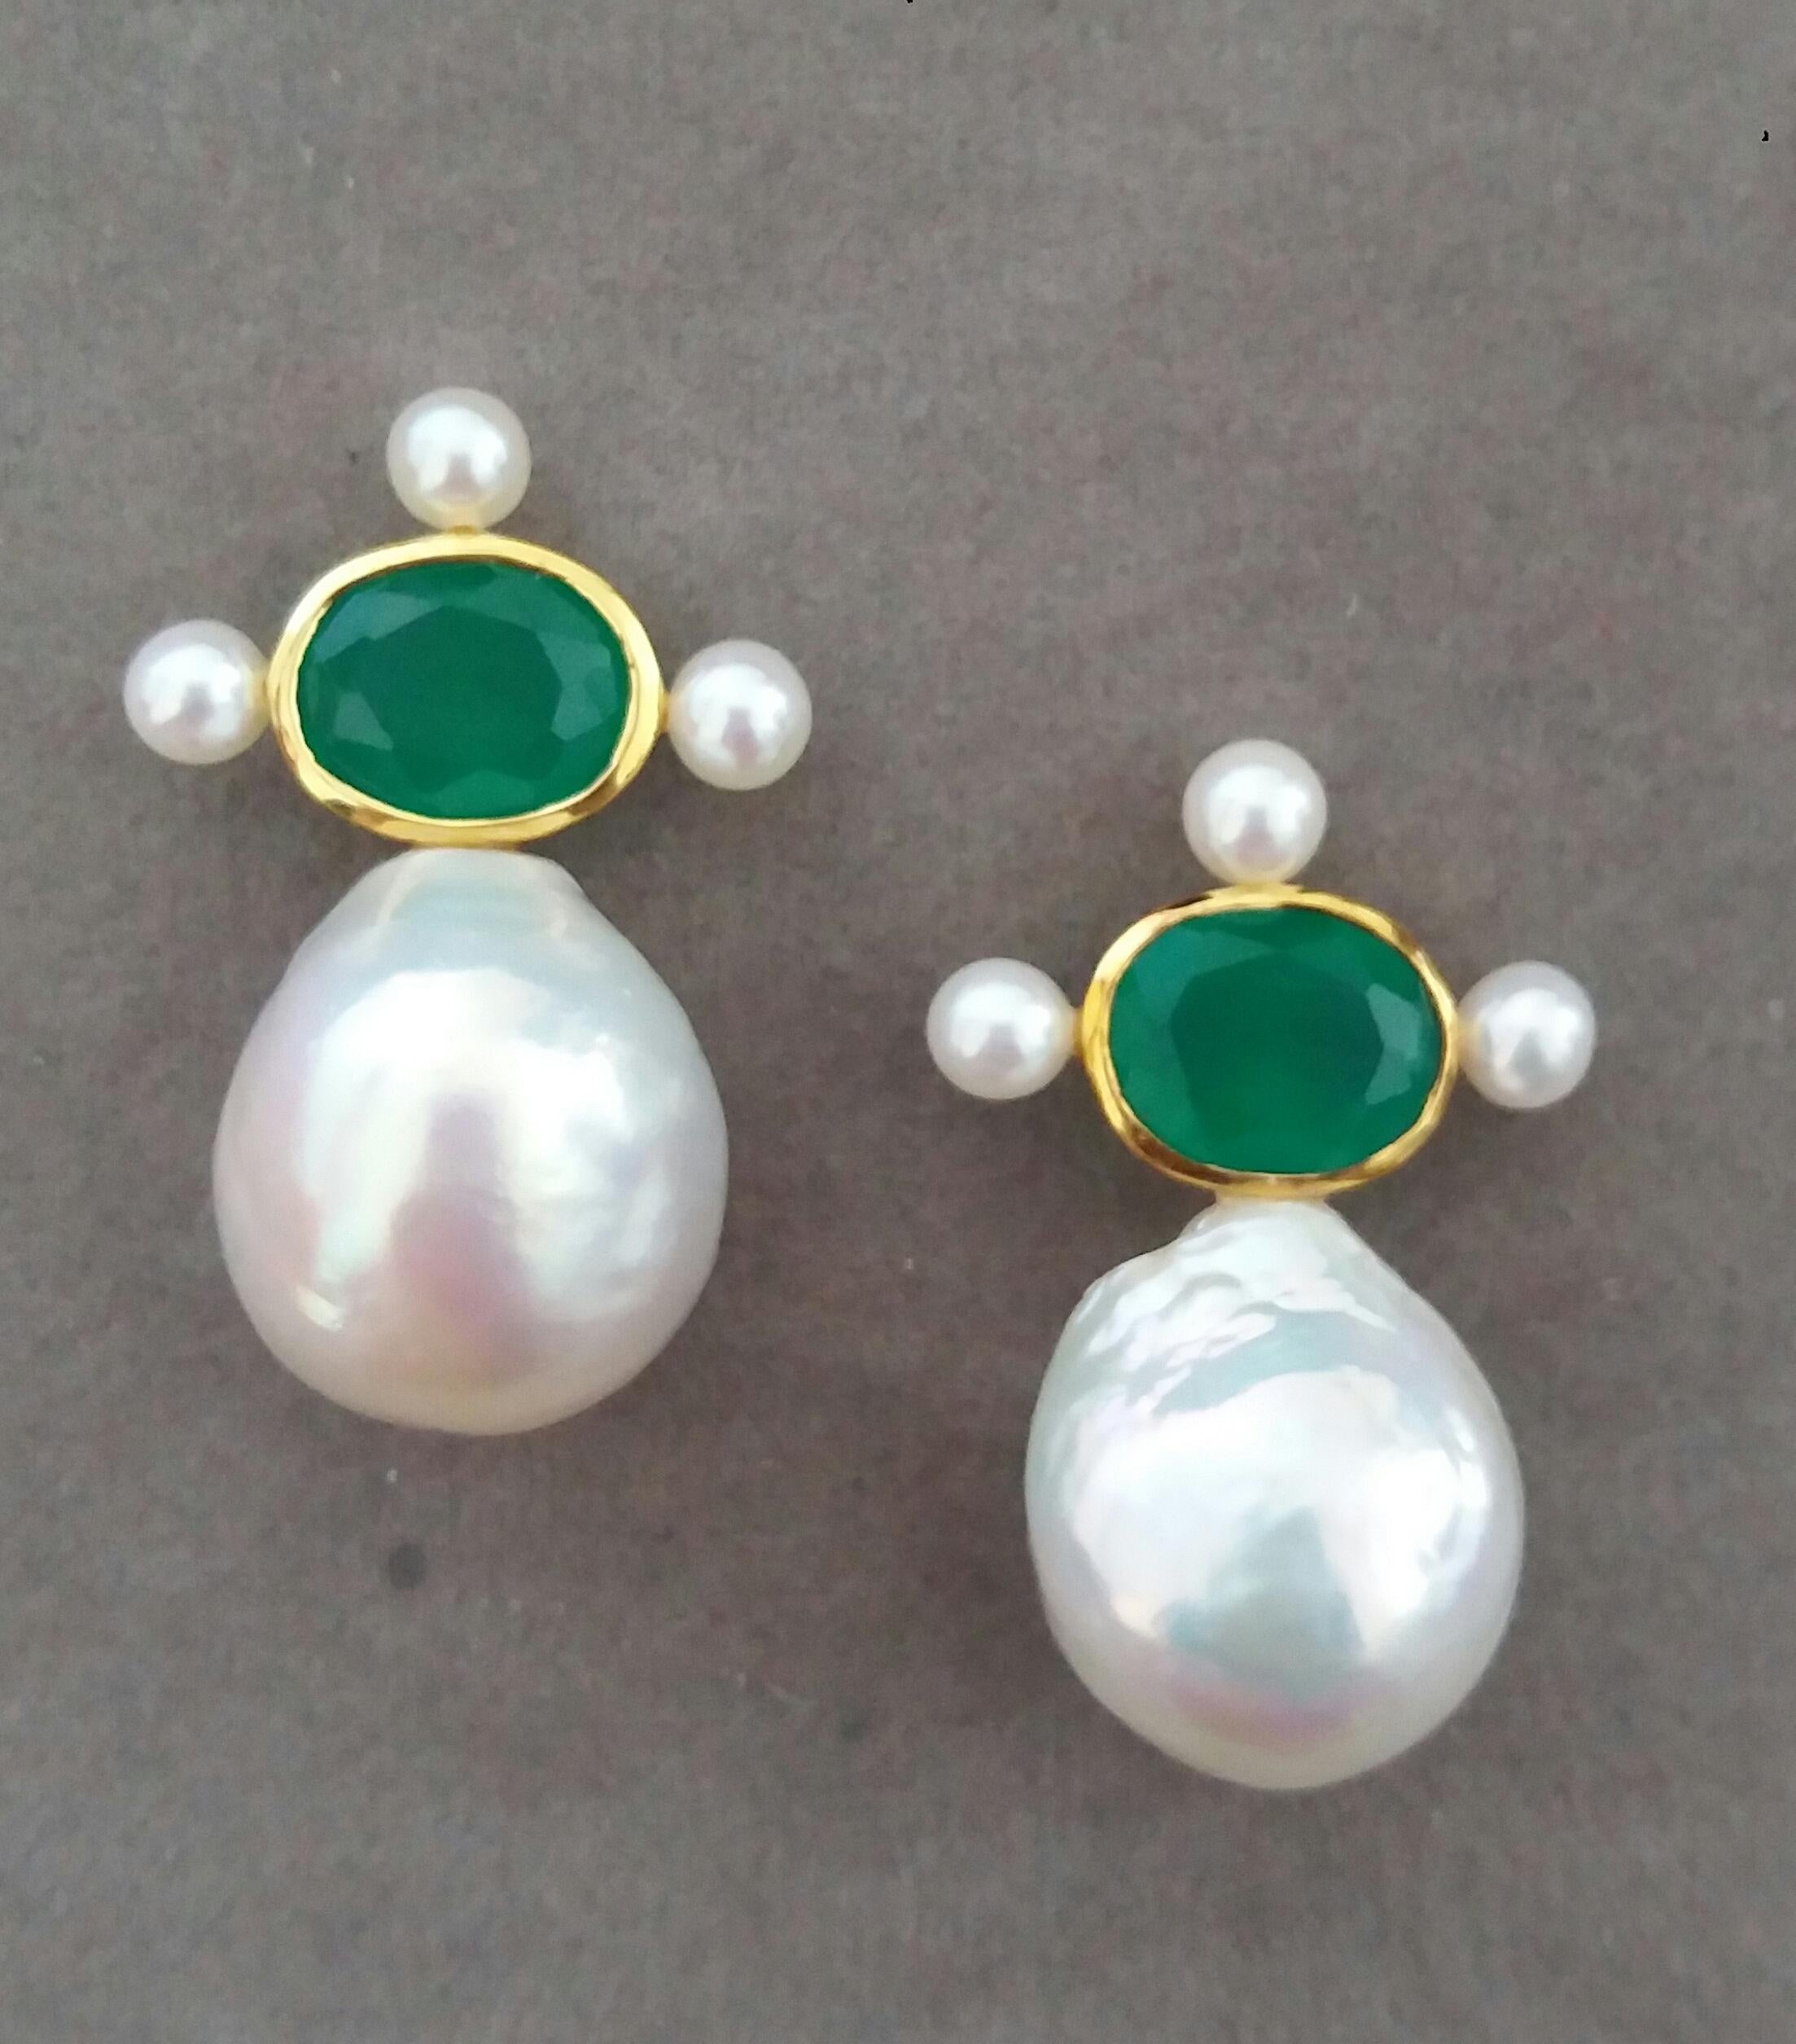 These elegant and handmade earrings have 2 Faceted Oval  Natural Green Onyx measuring 8 x 10 mm set in a 14 Kt yellow gold bezel with 3 small round pearls of 3 mm on 3 sides at the top to which are suspended 2 very good luster White Pear Shape